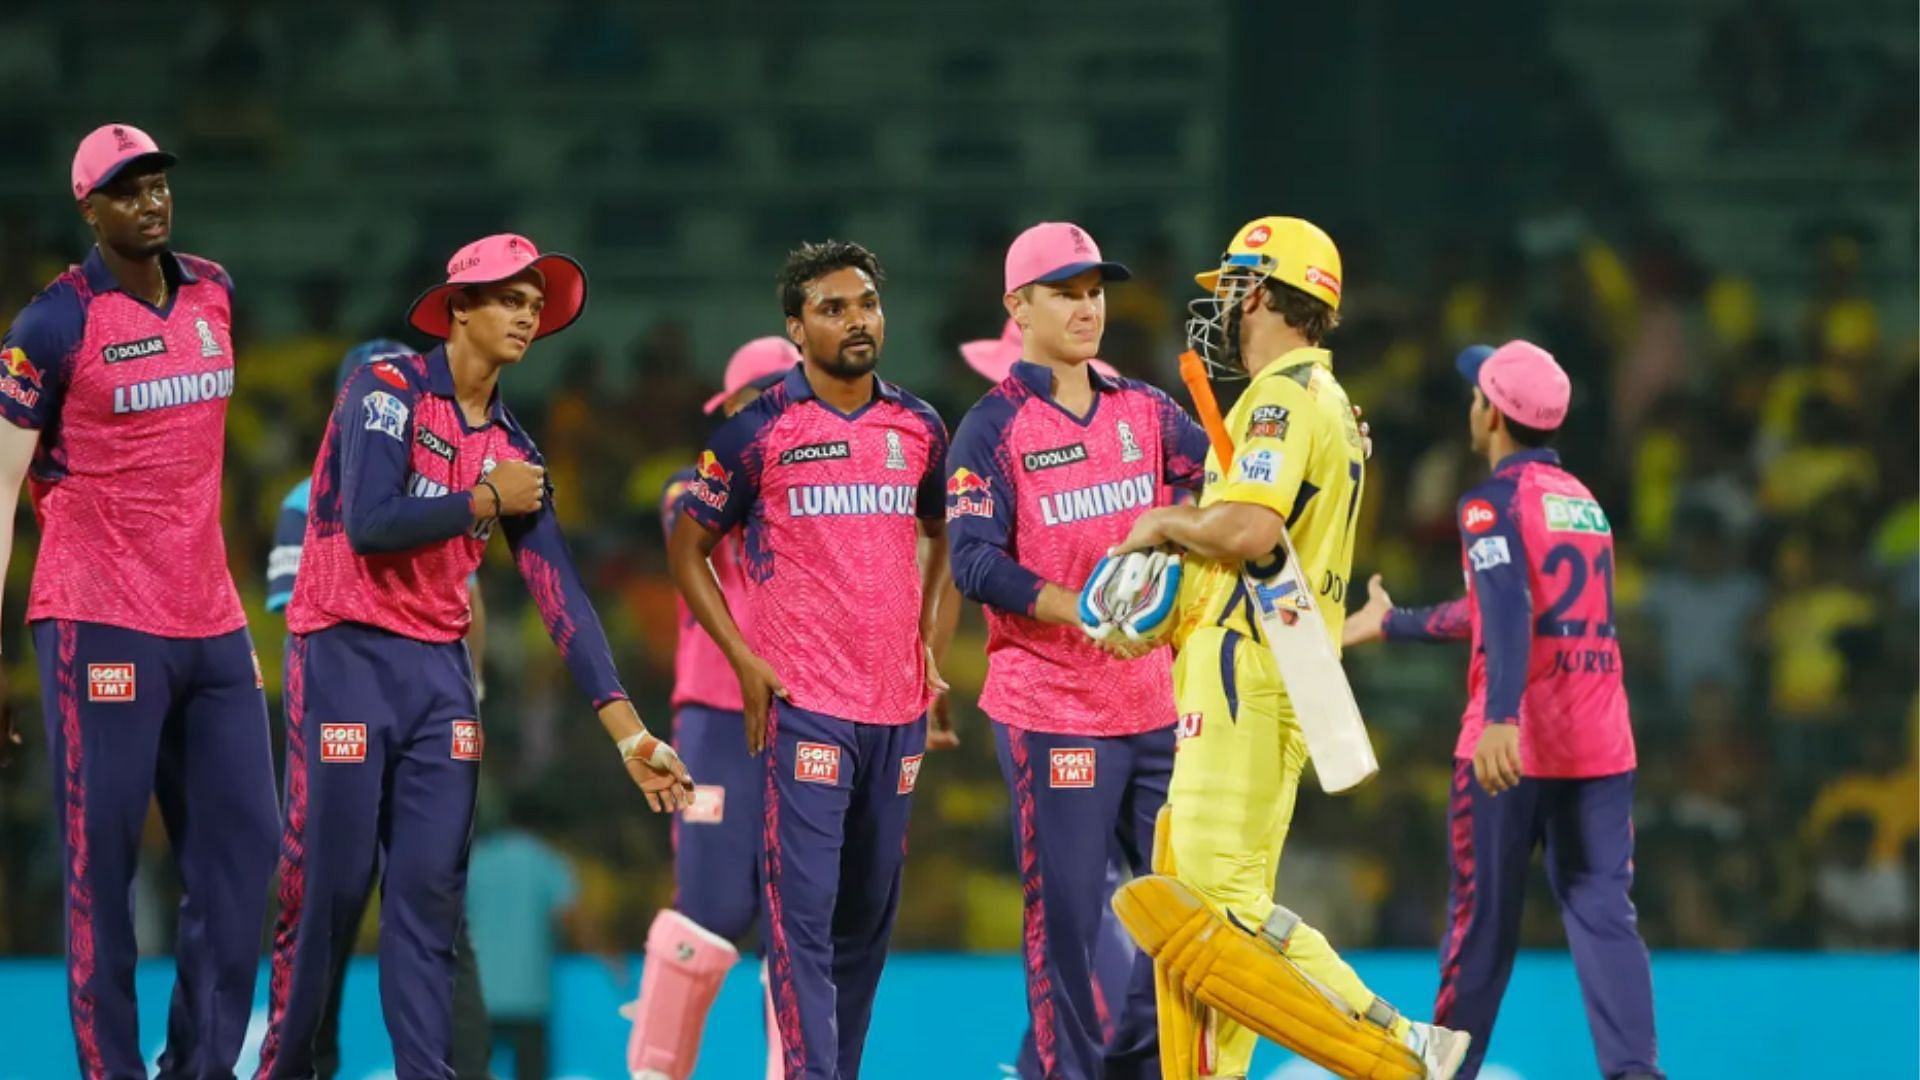 MS Dhoni shakes hands with the Rajasthan Royals team after CSK